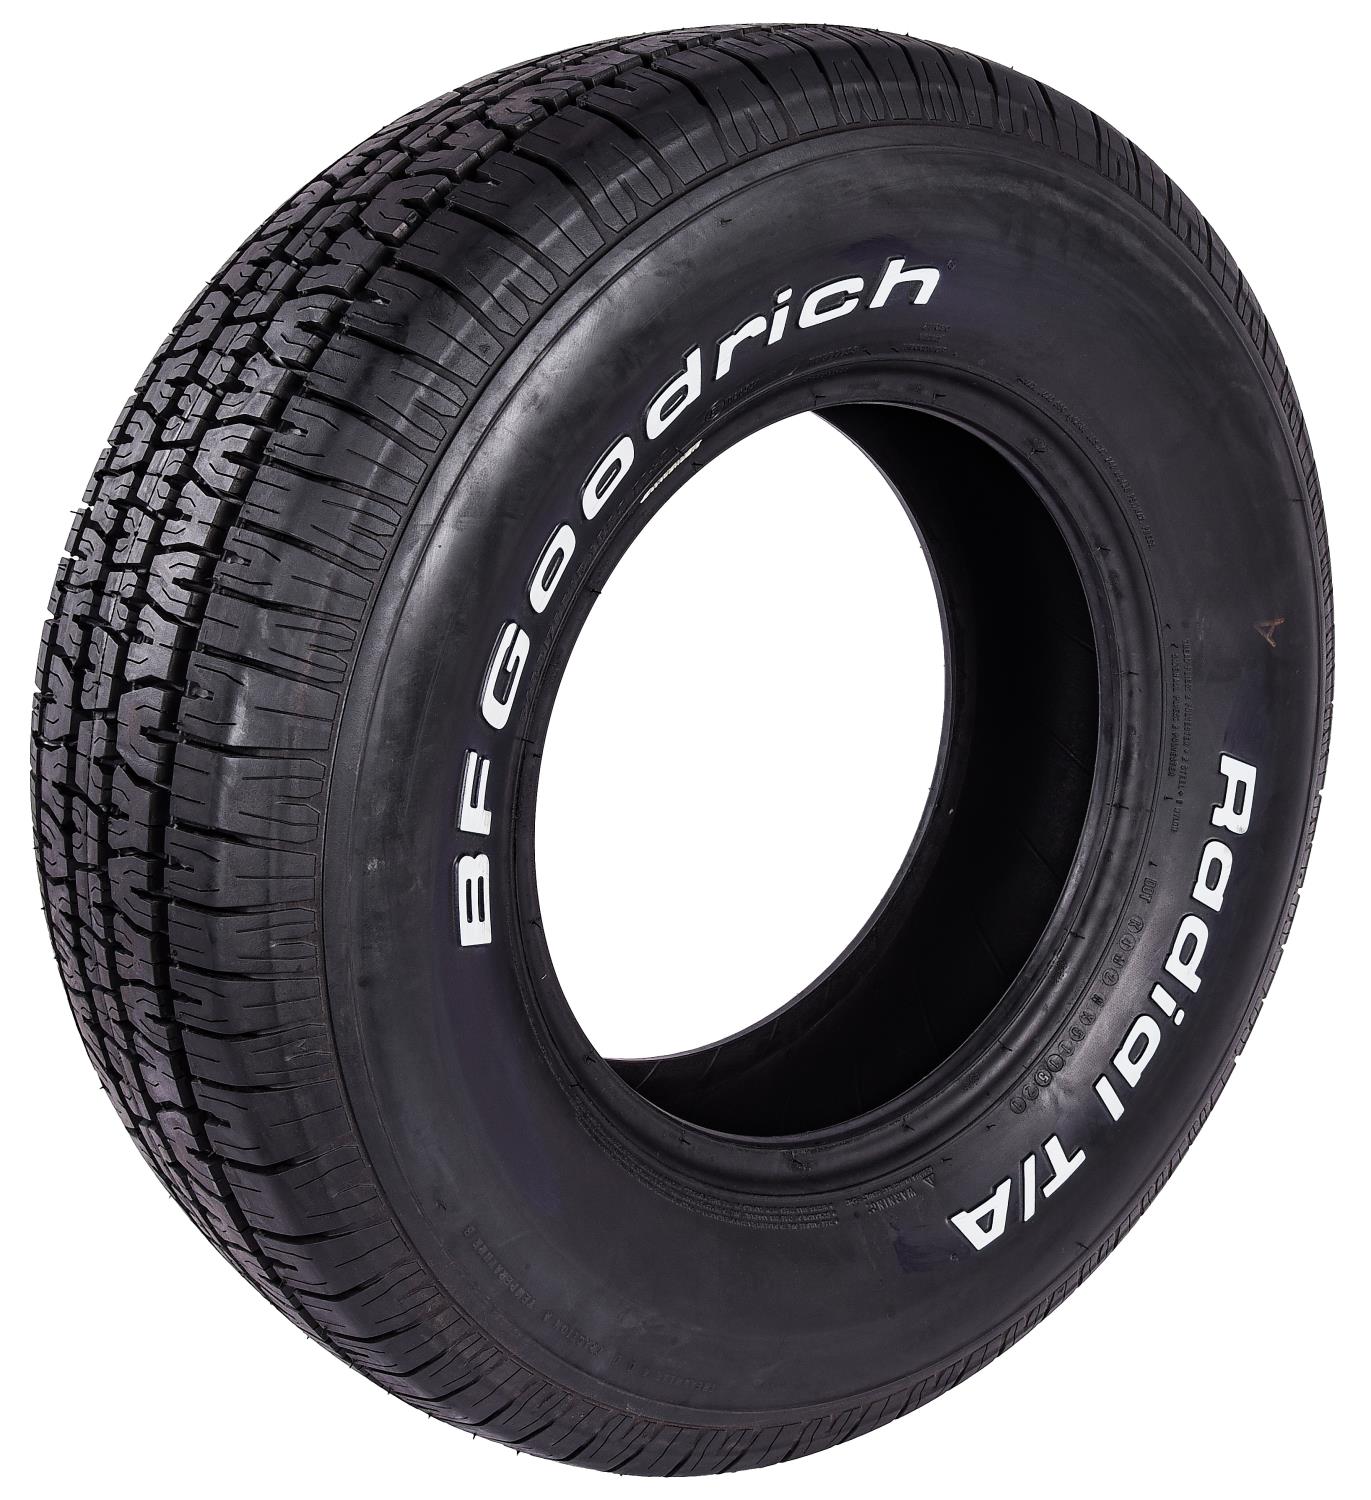 Radial T/A Tire P255/70R15